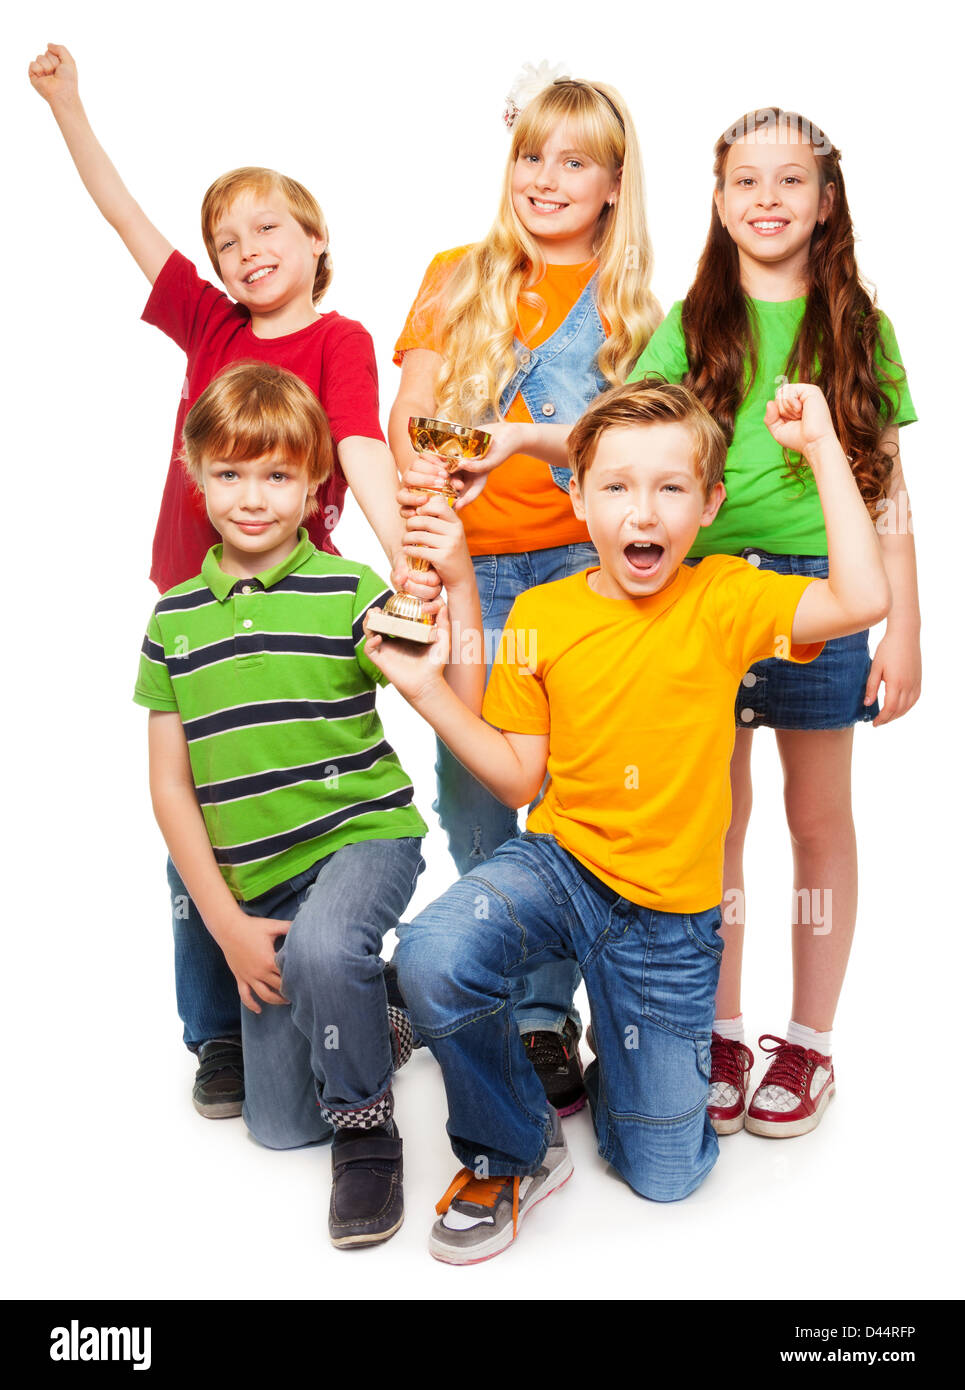 Winning team of five eight years boys and girls with bowl screaming and smiling Stock Photo